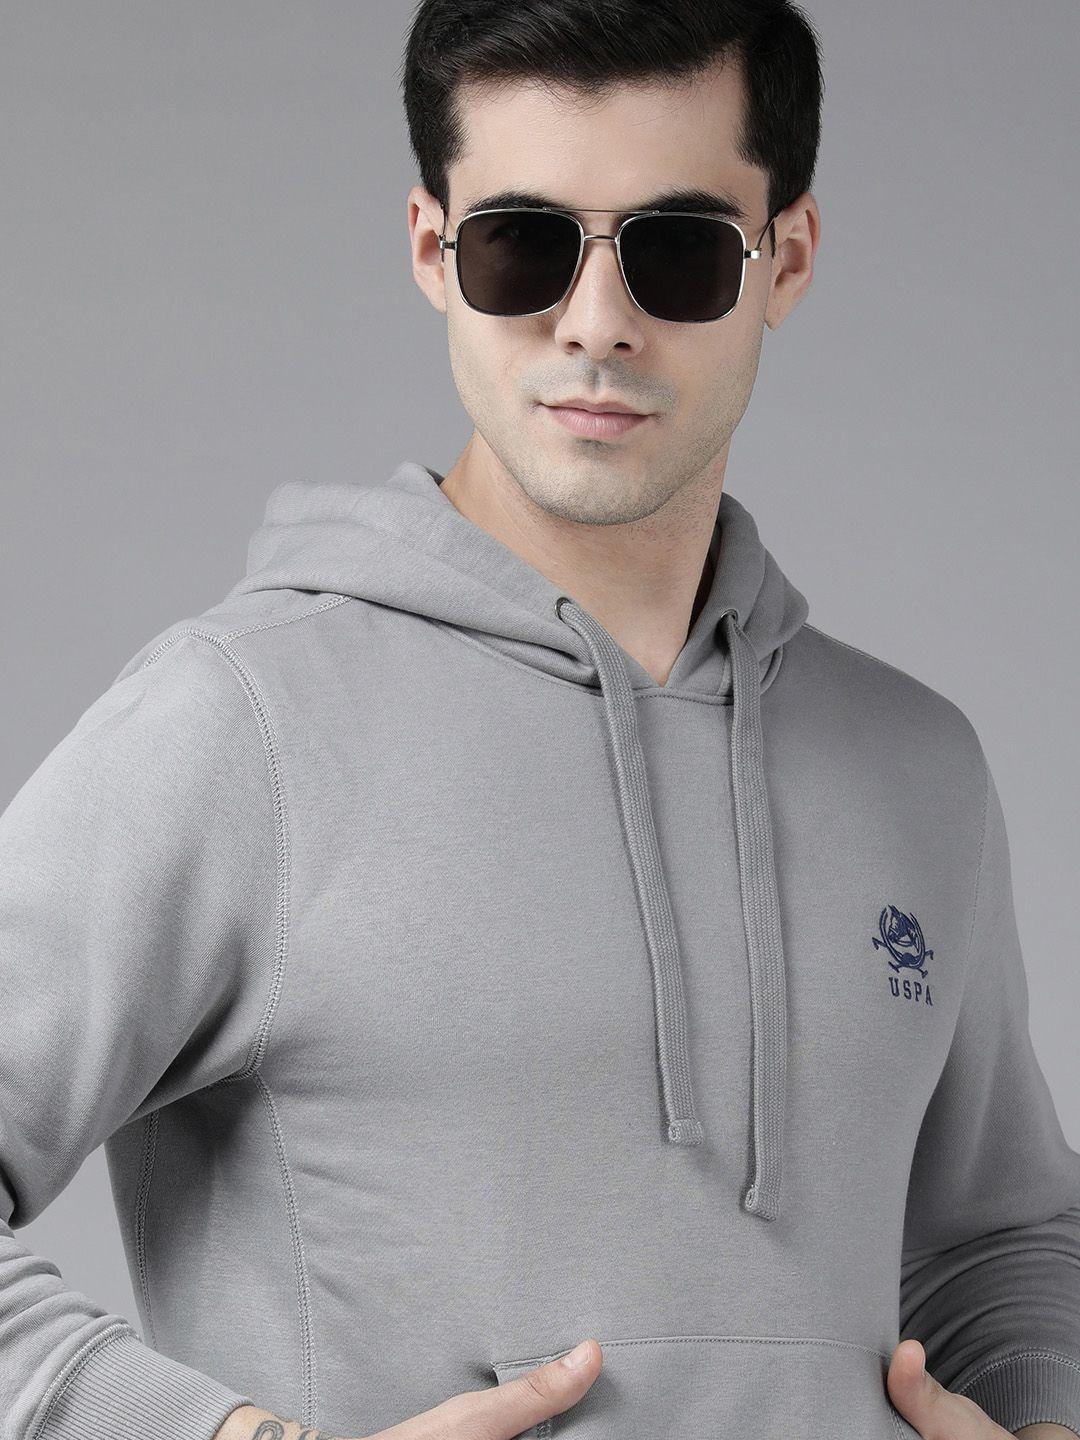 u s polo assn men grey embroidered hooded pullover sweatshirt